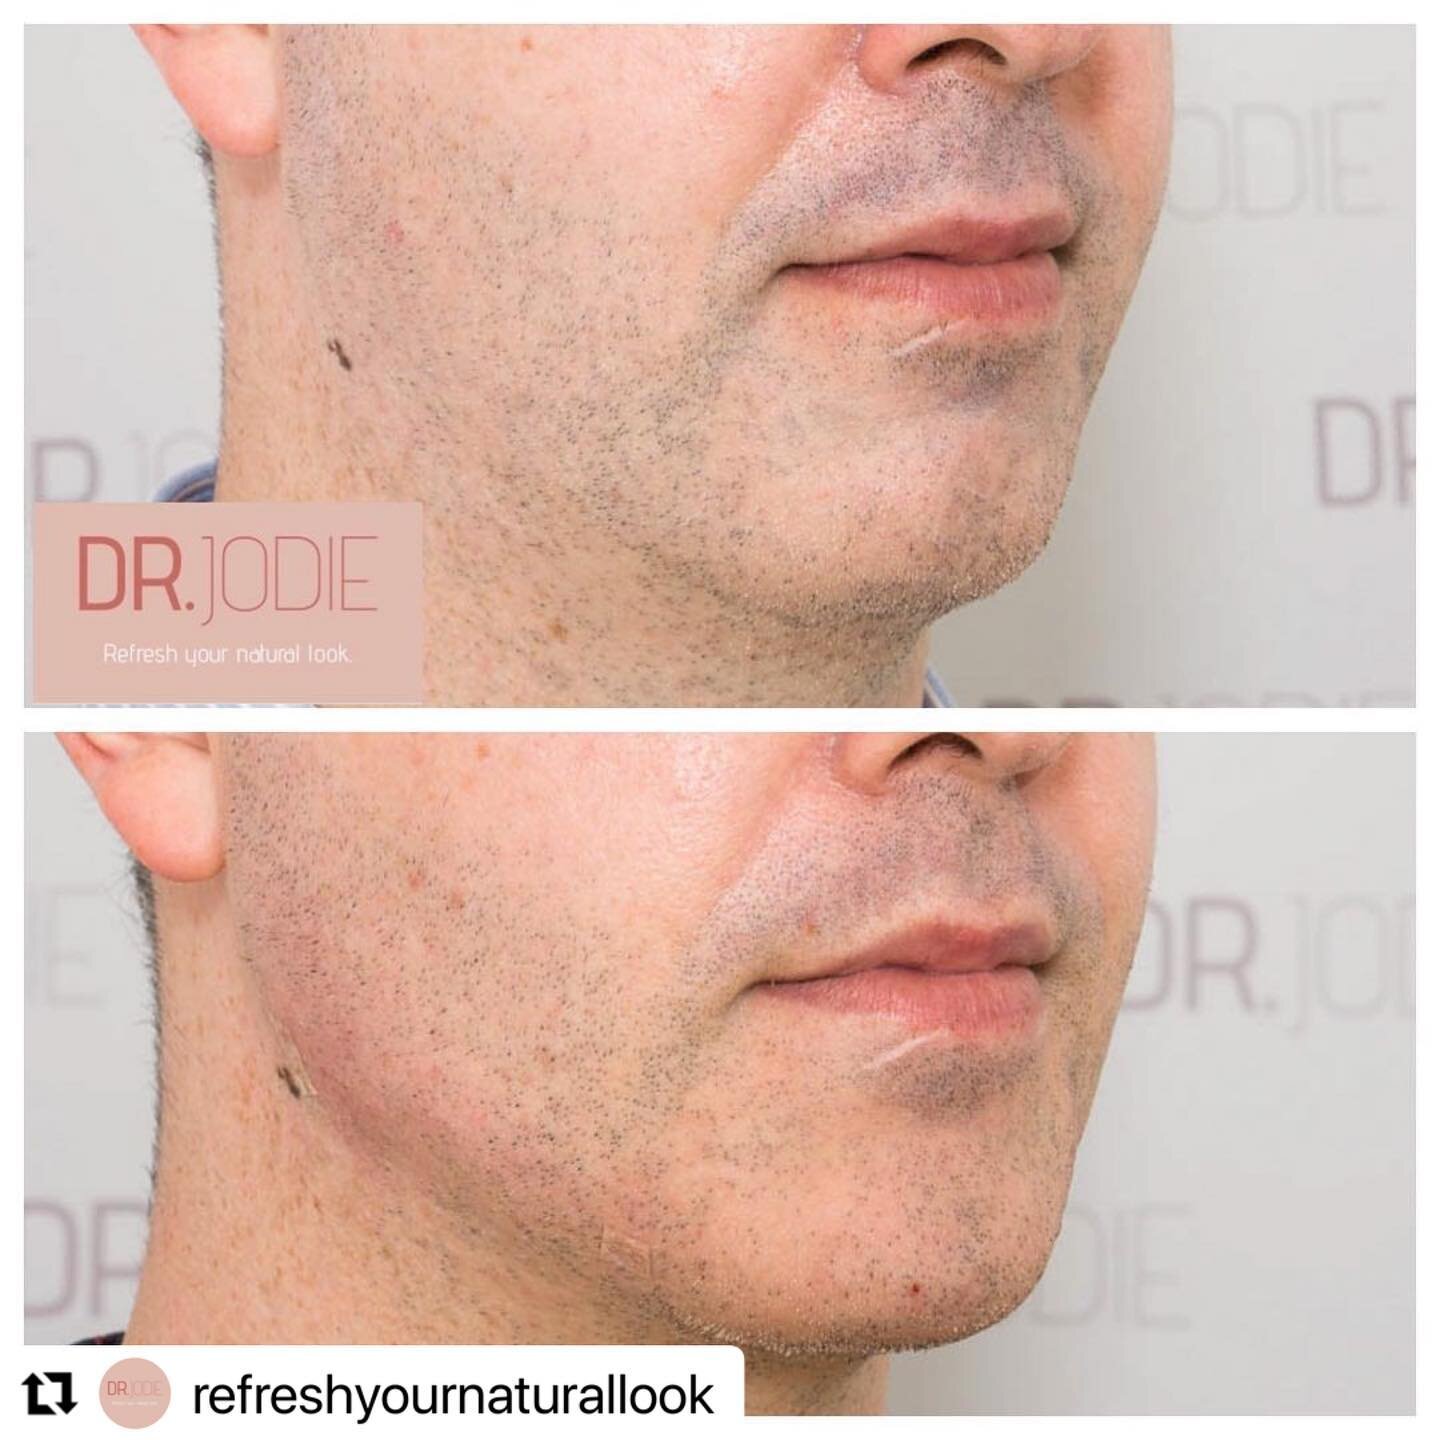 #Repost @refreshyournaturallook with @make_repost
・・・
Remember this lovely guy? Previously I showed you my client&rsquo;s chin post dermal filler treatment. Today we built his jawline even more. And the results speak for themselves! No beard required